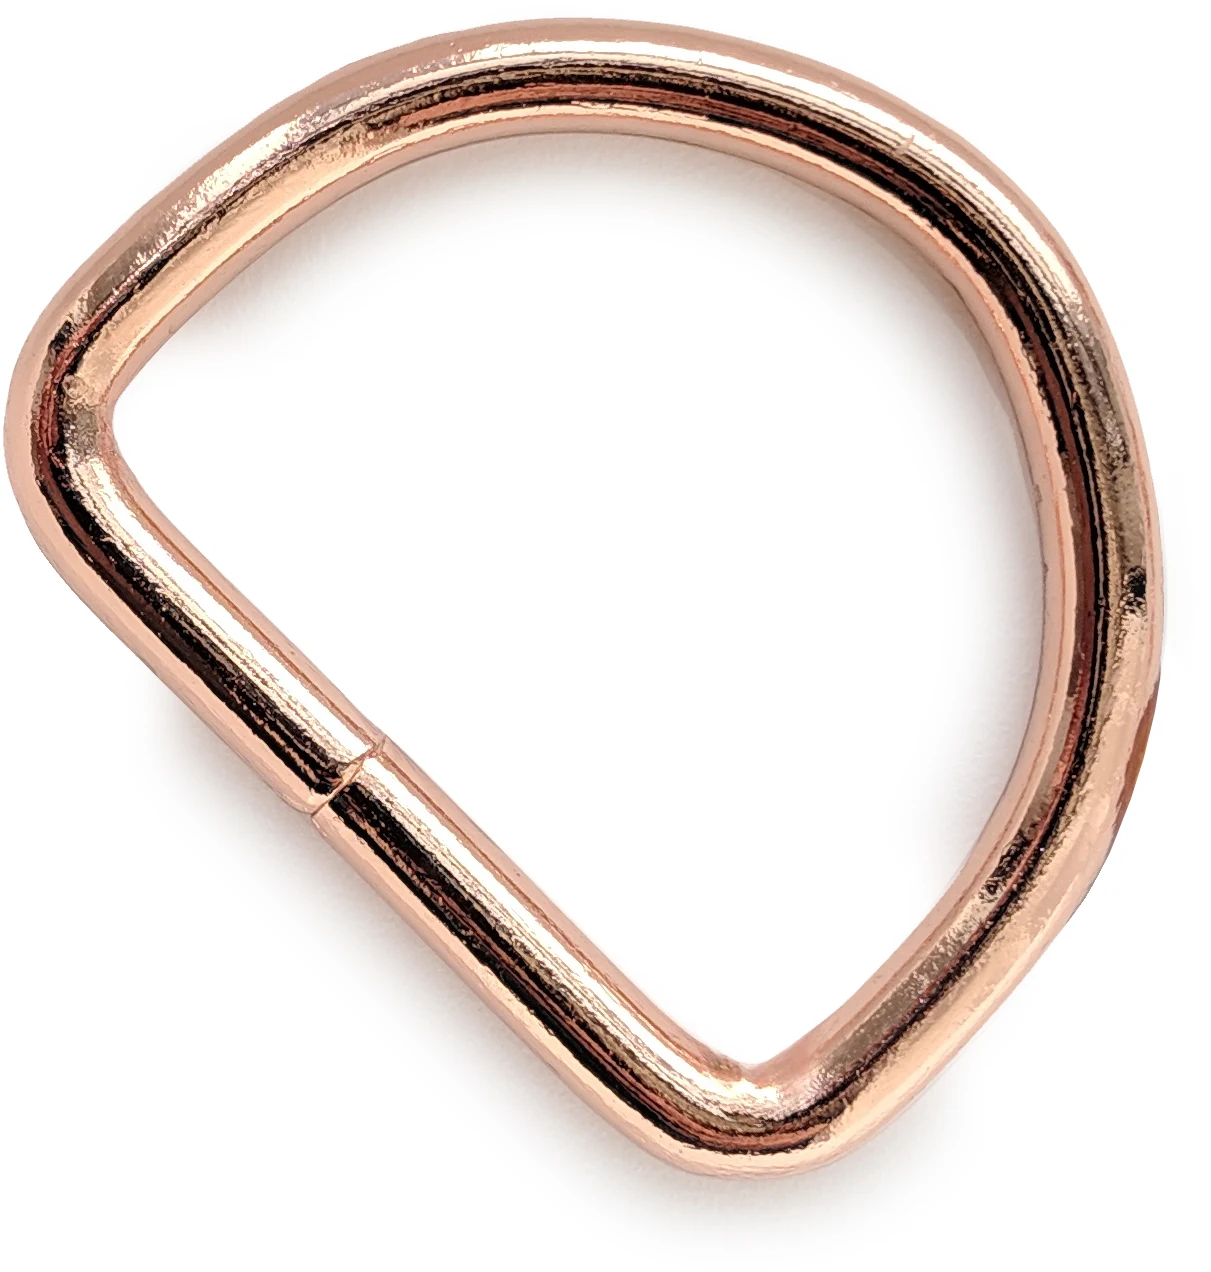 A rose gold d ring with welded connection.